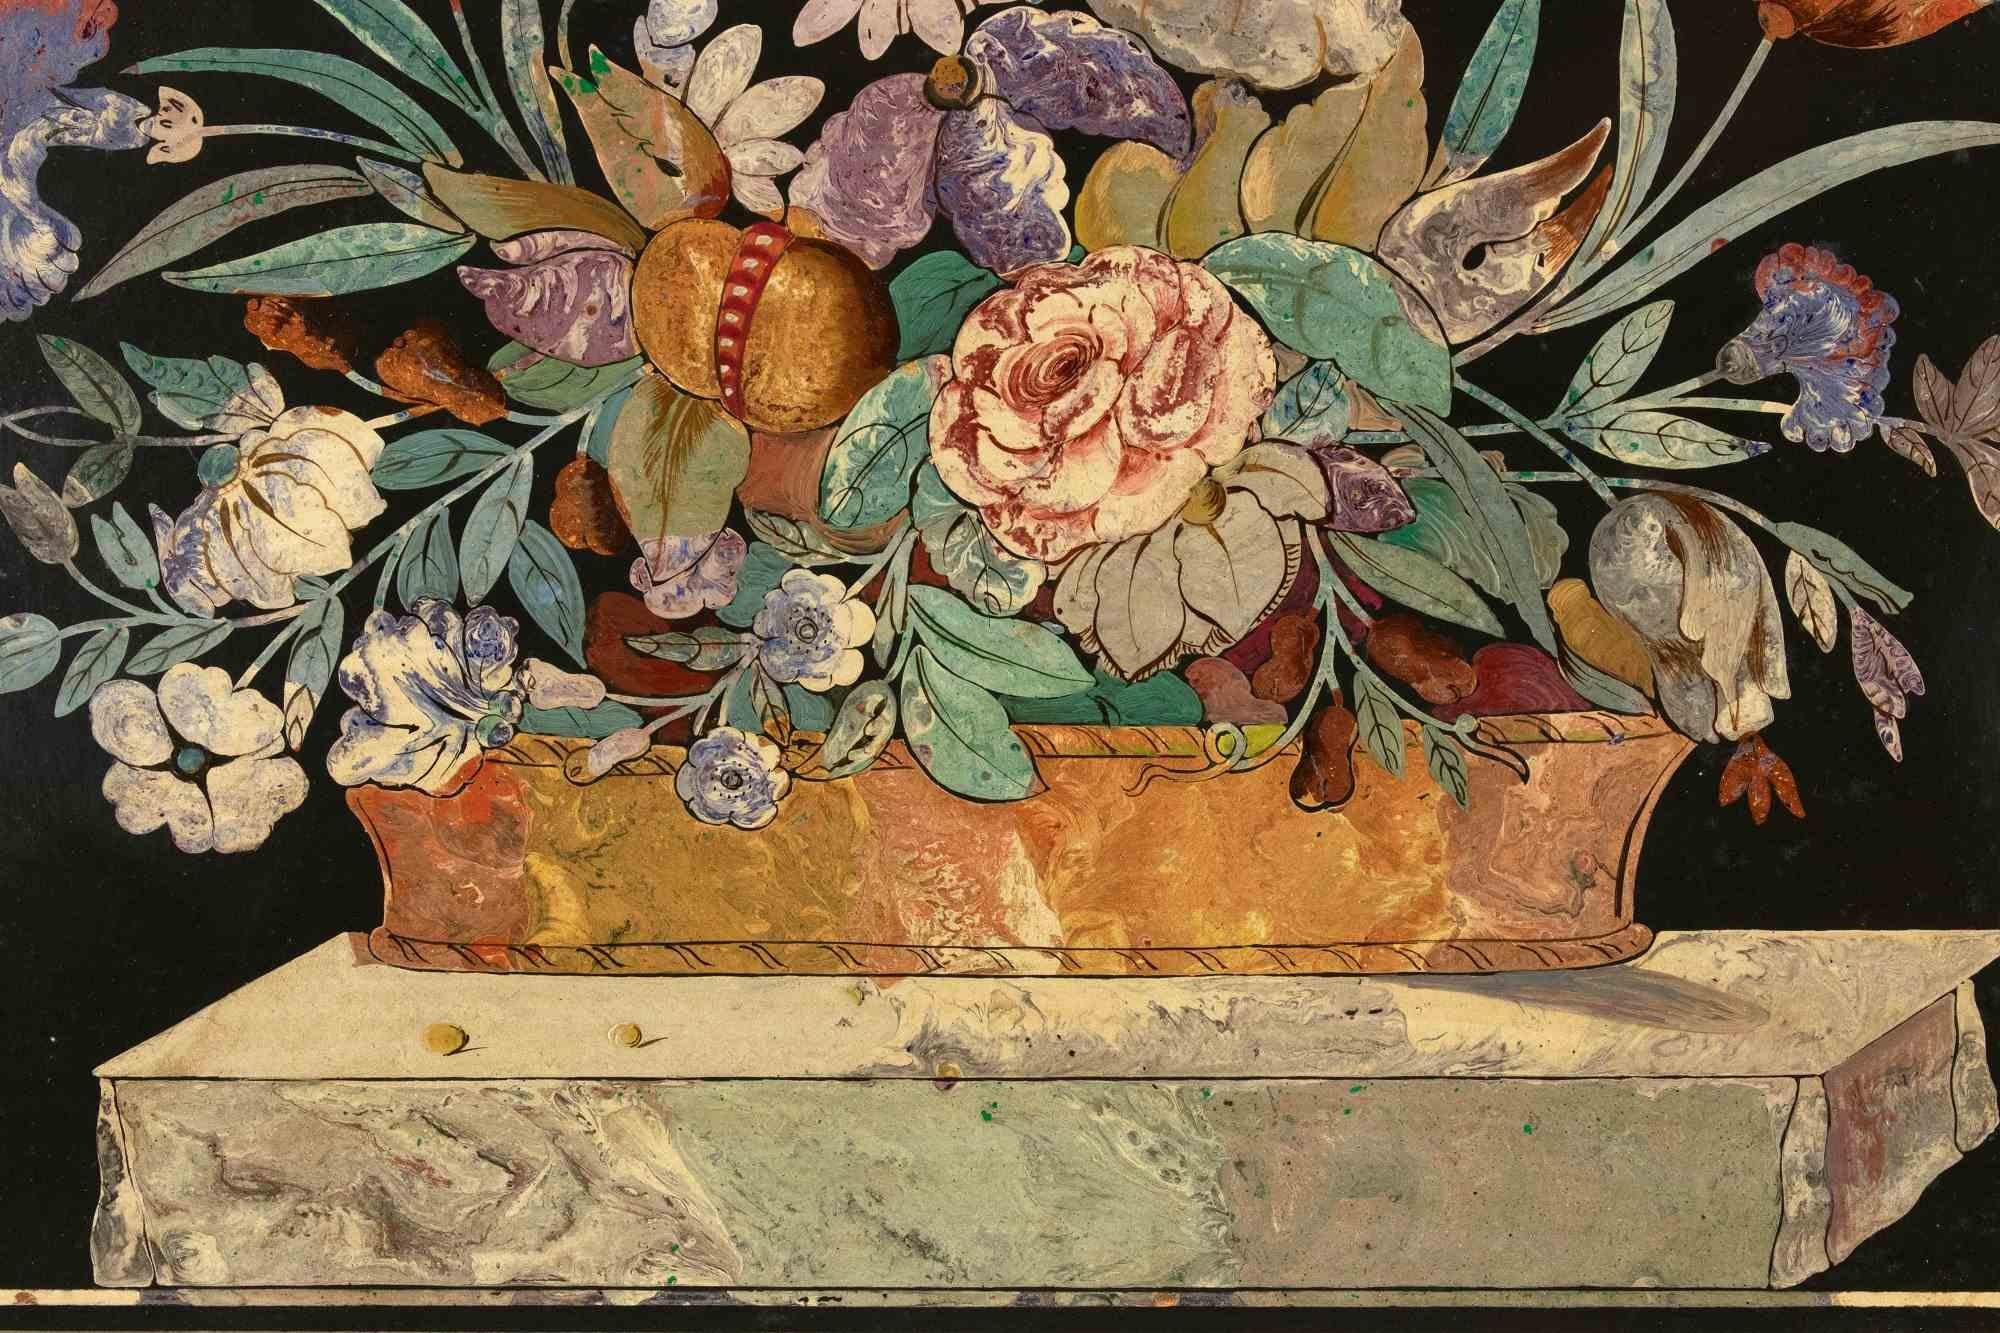 Flower -  Painting in Scagliola - 19th Century - Modern Mixed Media Art by Unknown